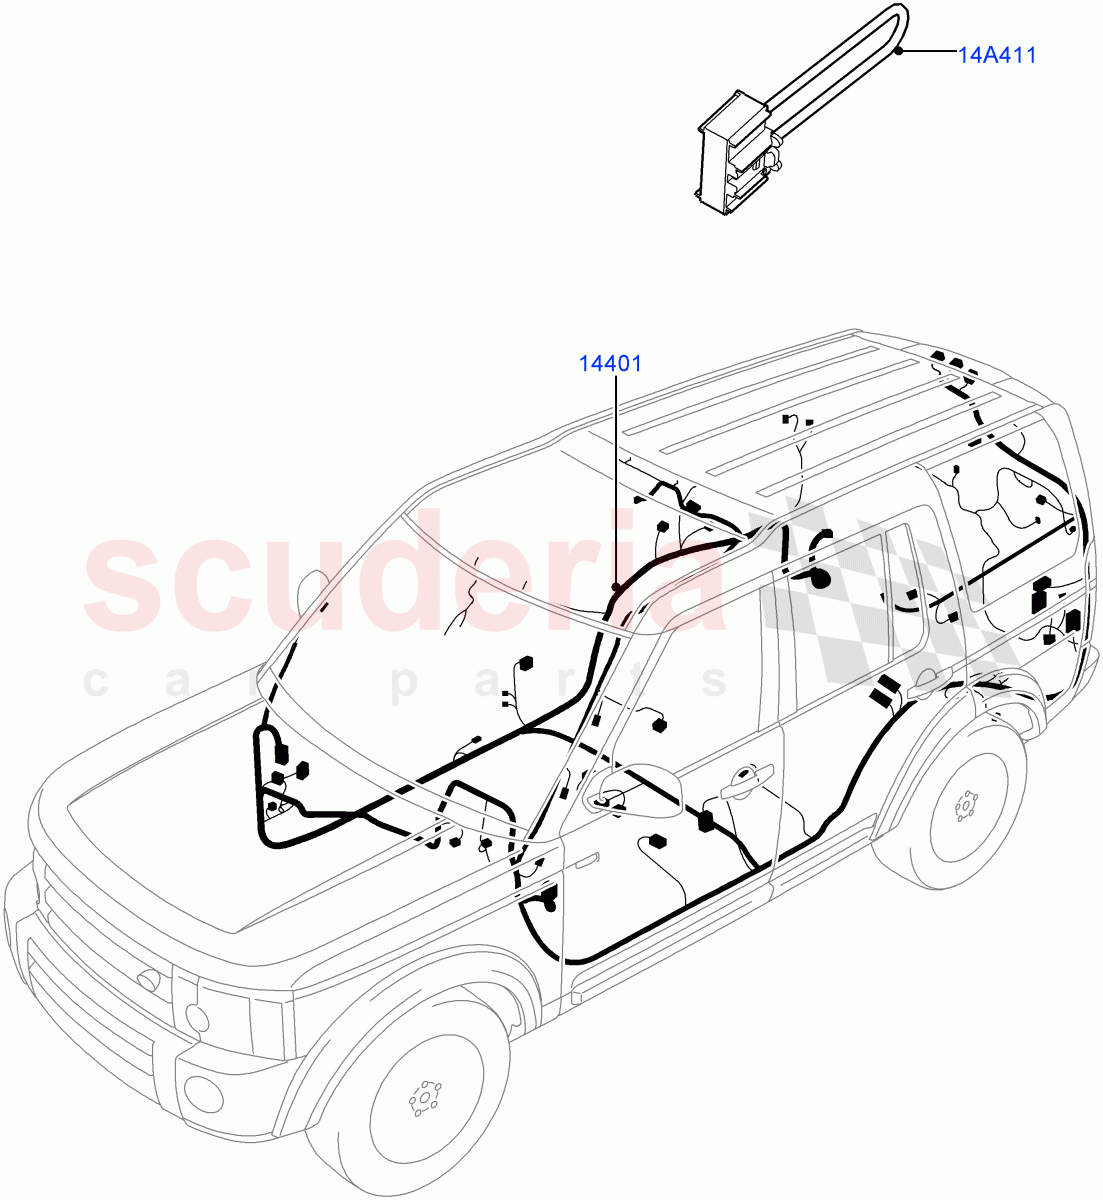 Electrical Wiring - Engine And Dash(Main Harness)((V)FROMCA000001,(V)TOFA999999) of Land Rover Land Rover Discovery 4 (2010-2016) [3.0 Diesel 24V DOHC TC]